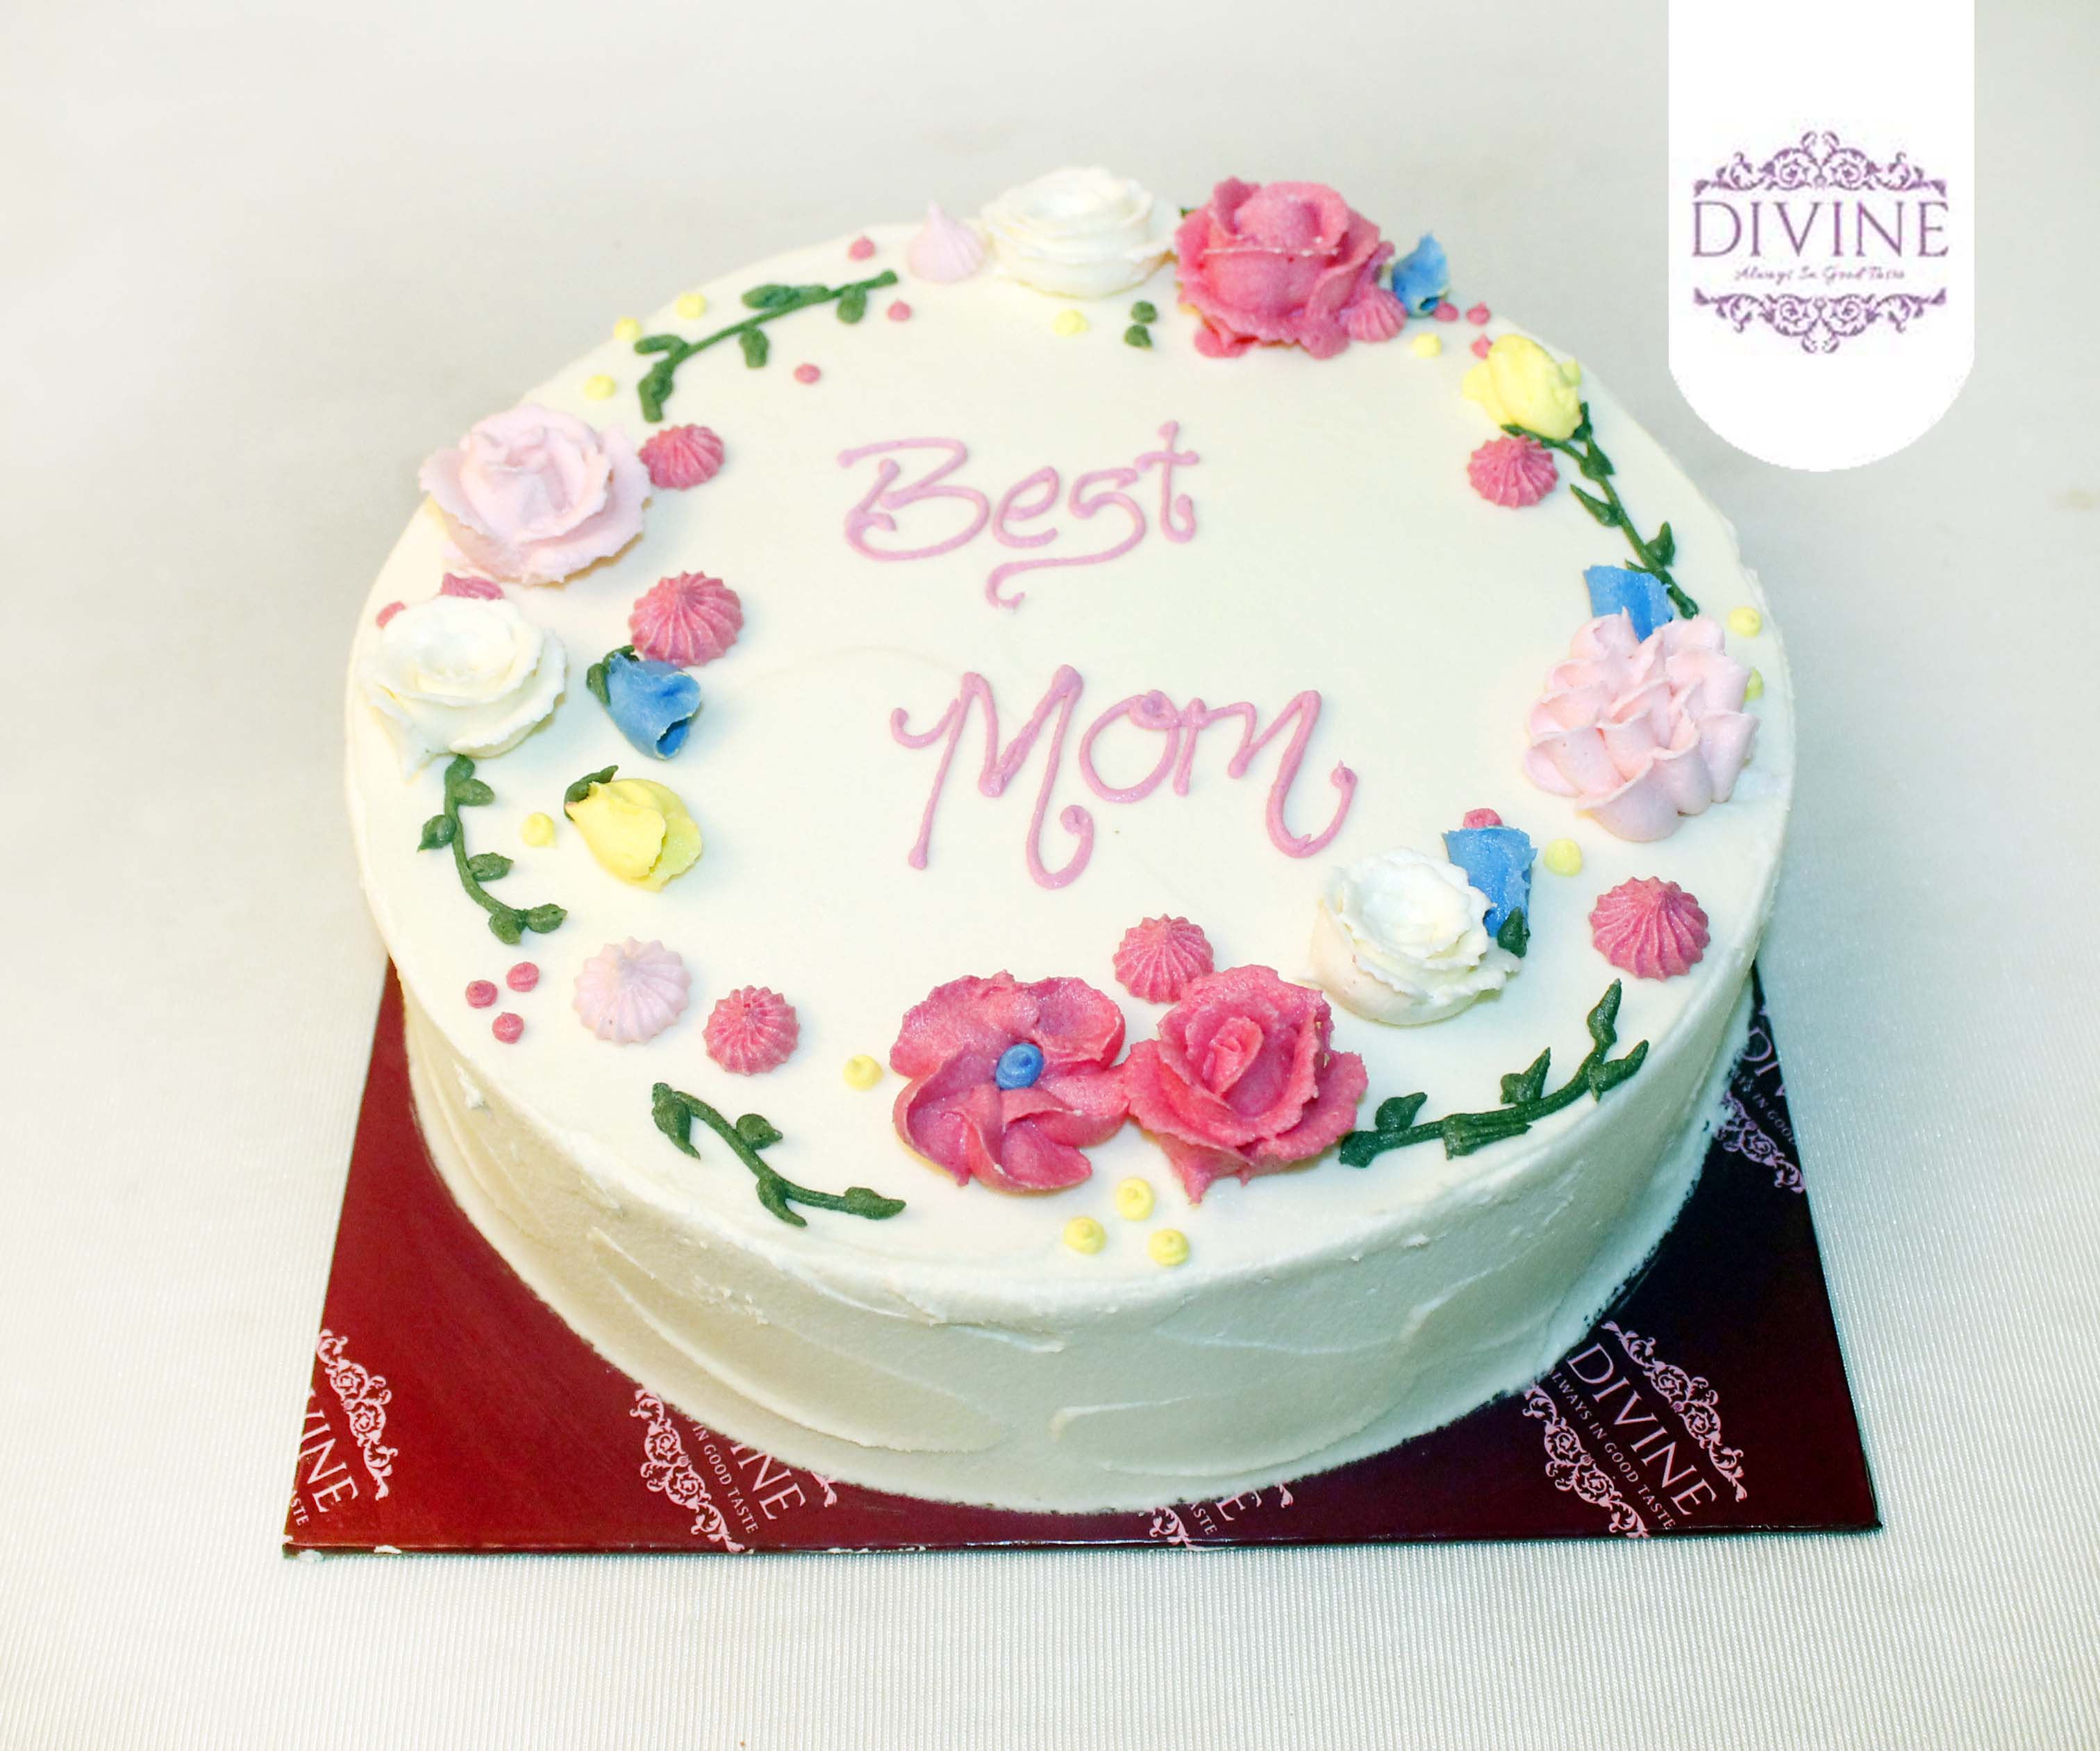 Baskin-Robbins' Guide to an Amazing Mother's Day | Baskin-Robbins